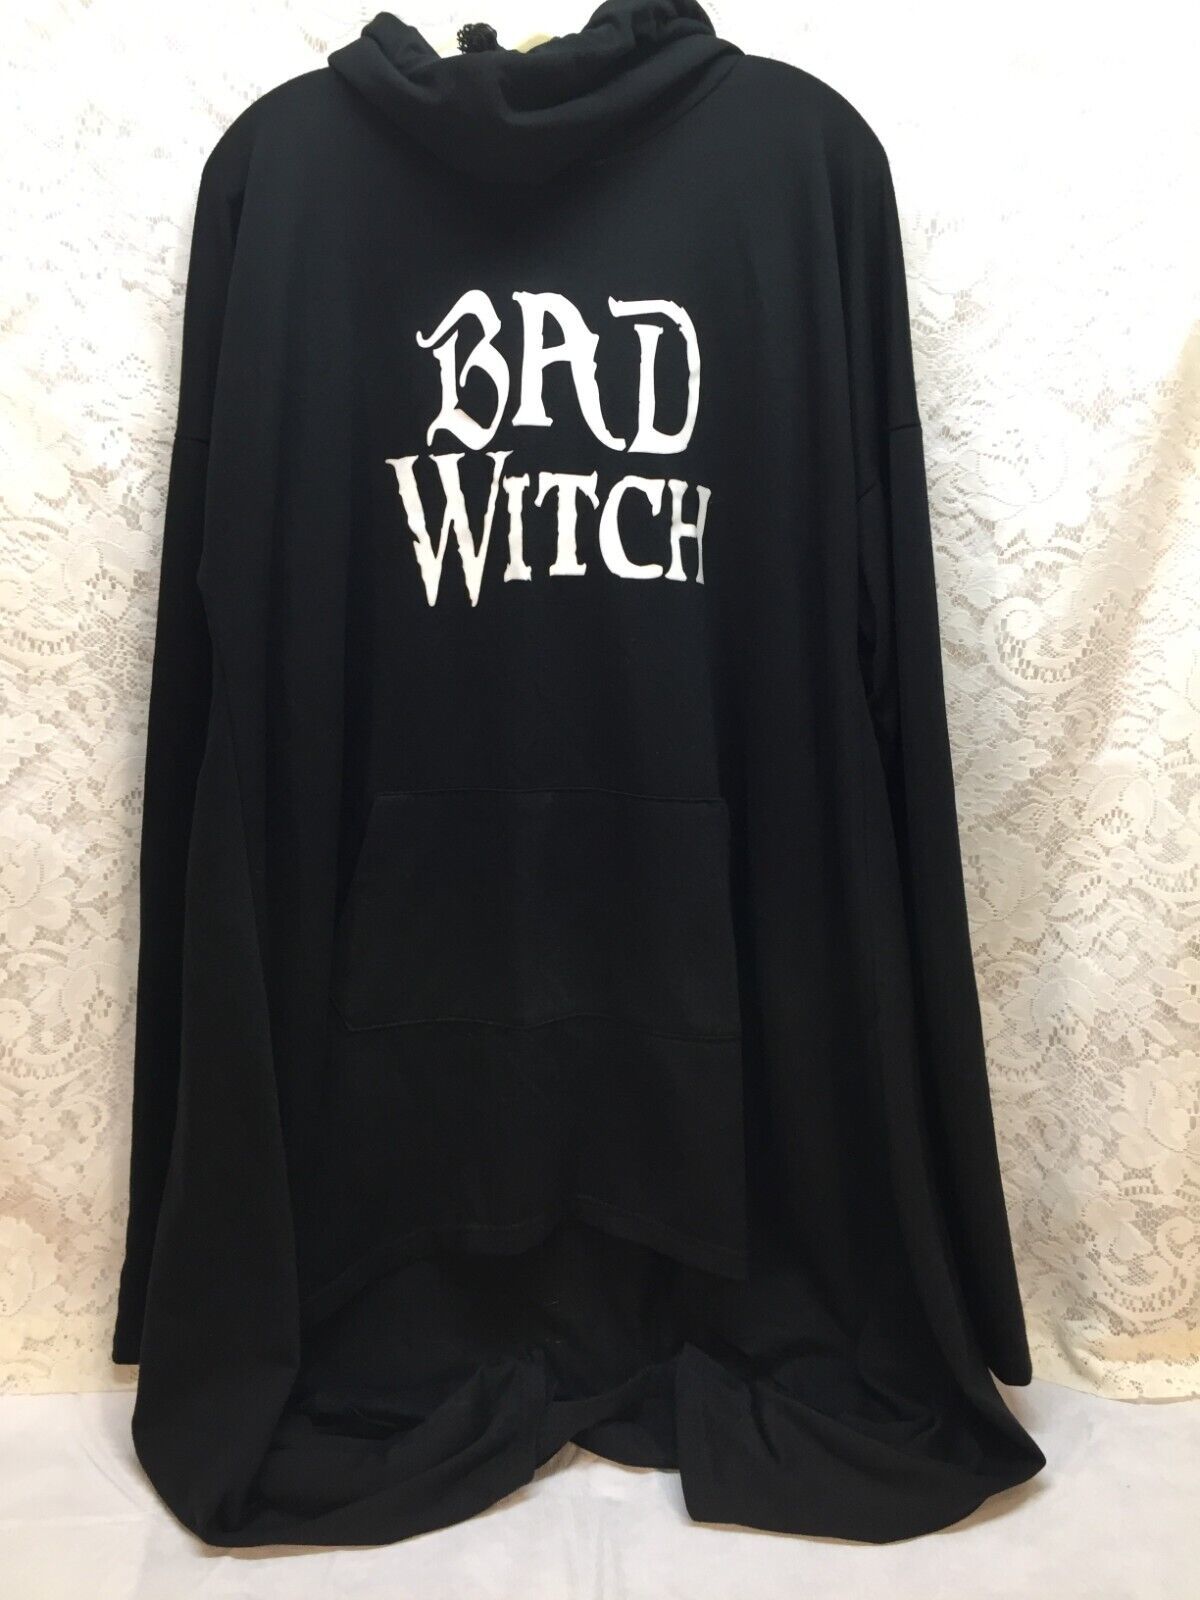 Primary image for Women's Girls Black Cloak Cape Coat Long Hoodie "BAD WITCH" Graphic